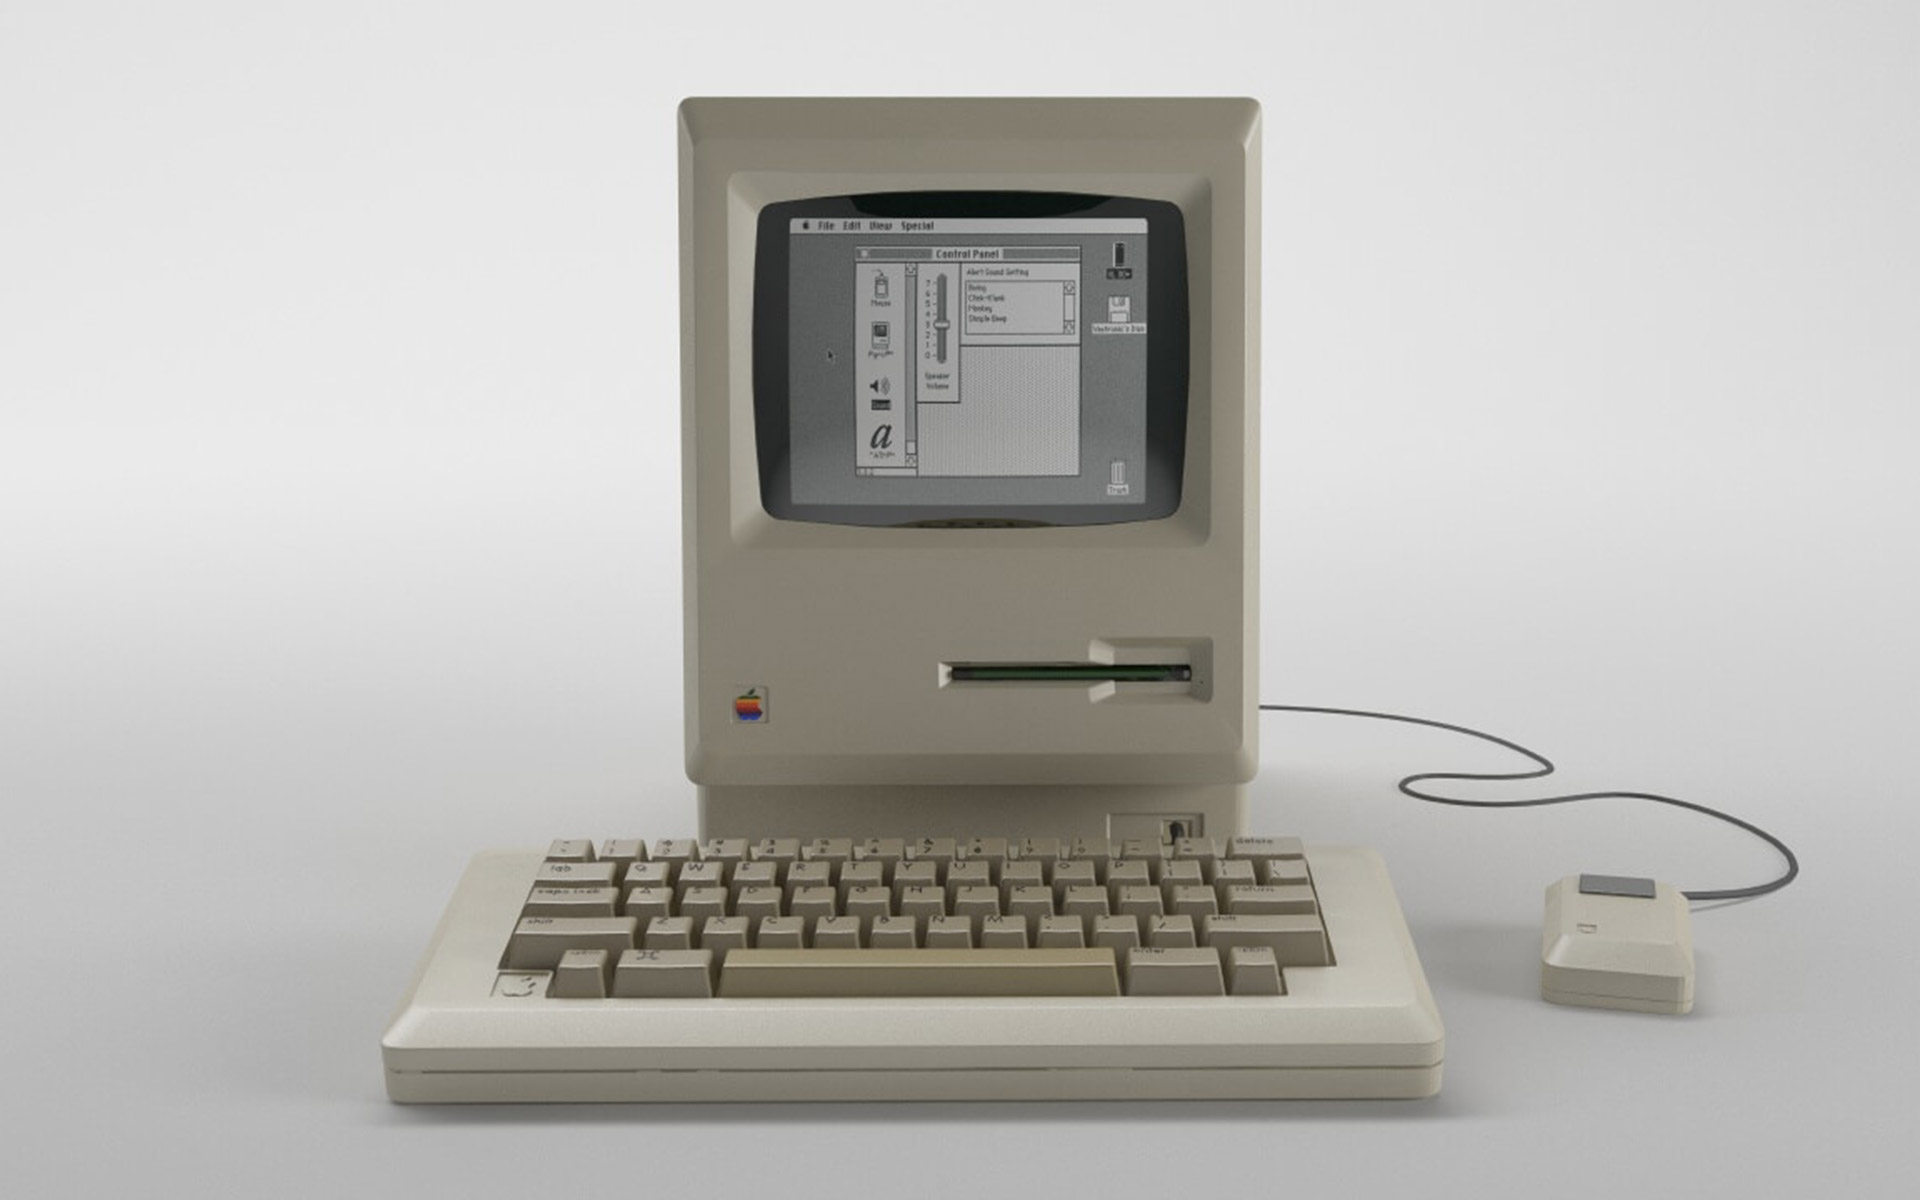 Apple Macintosh from the front